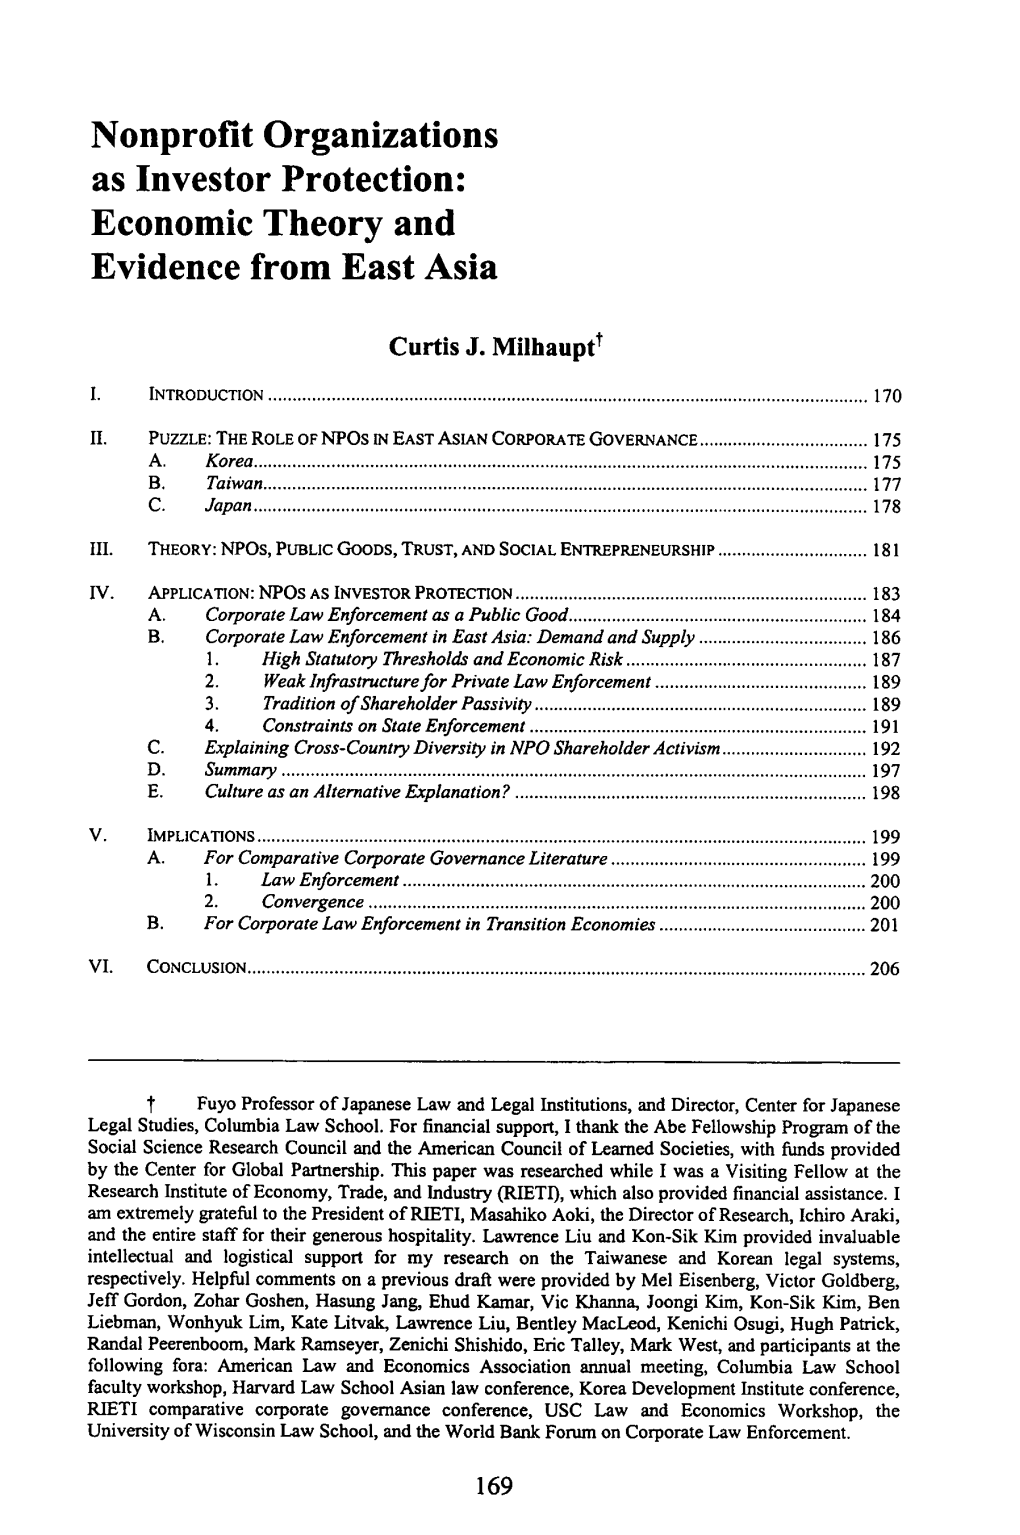 Nonprofit Organizations As Investor Protection: Economic Theory and Evidence from East Asia